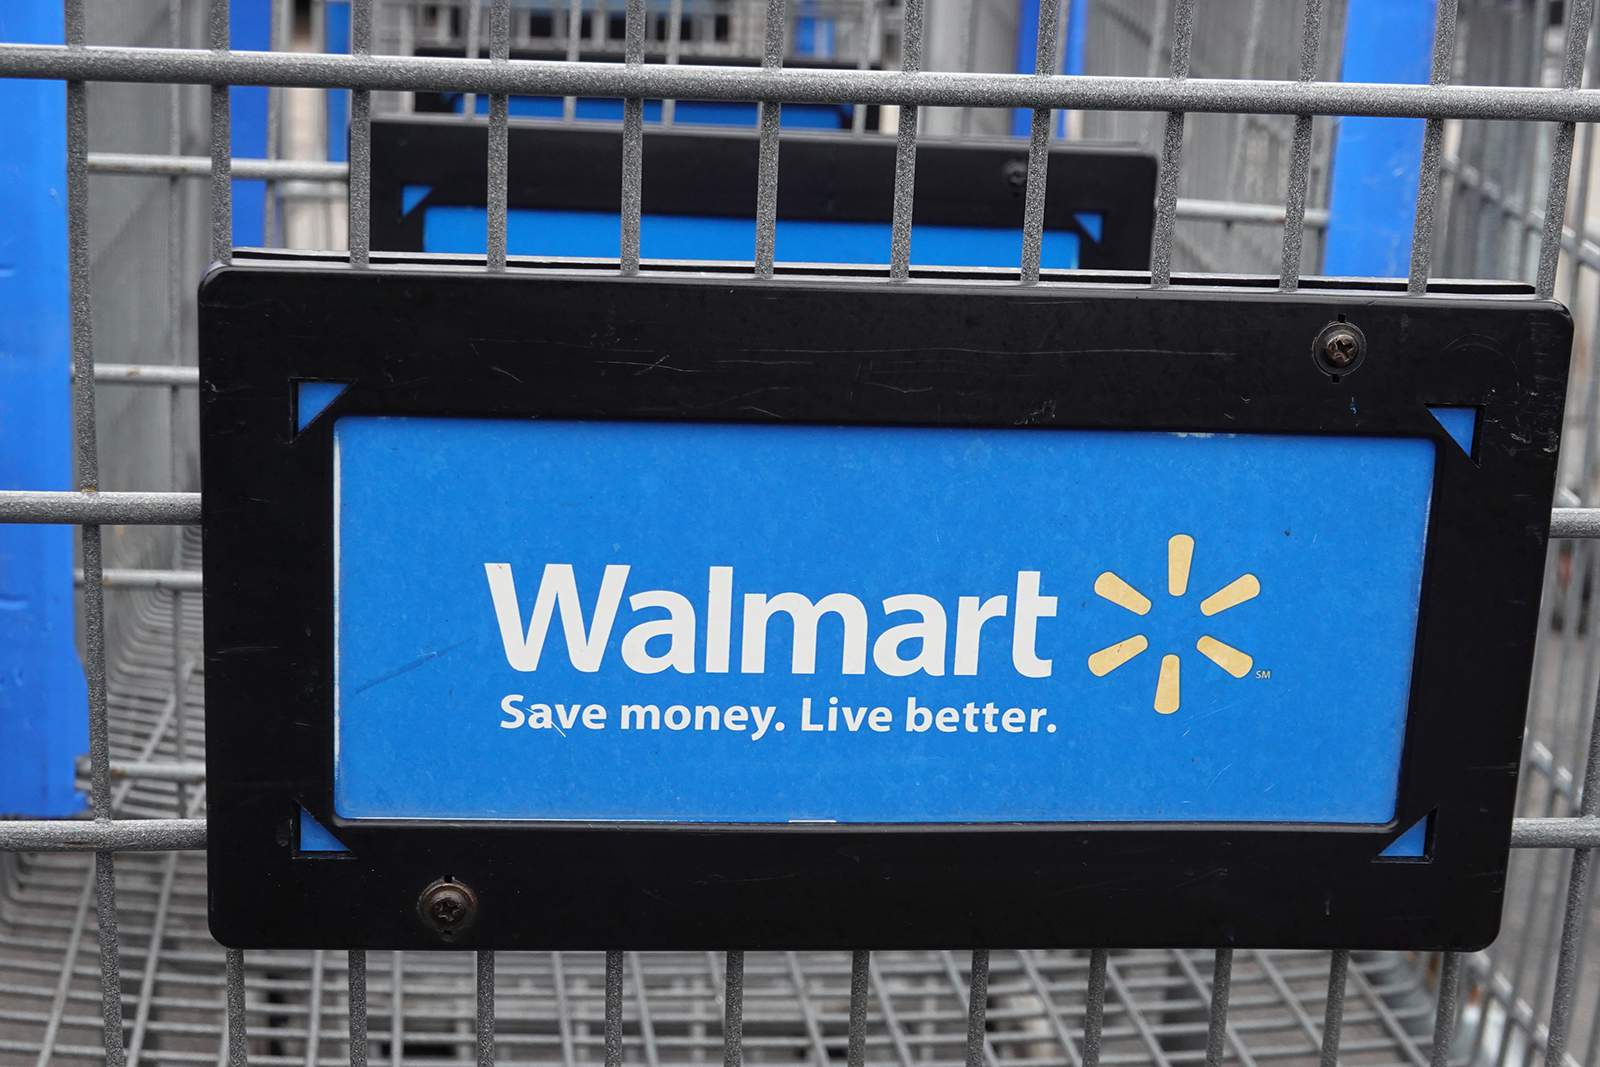 Walmart latest retailer to require customers to wear masks